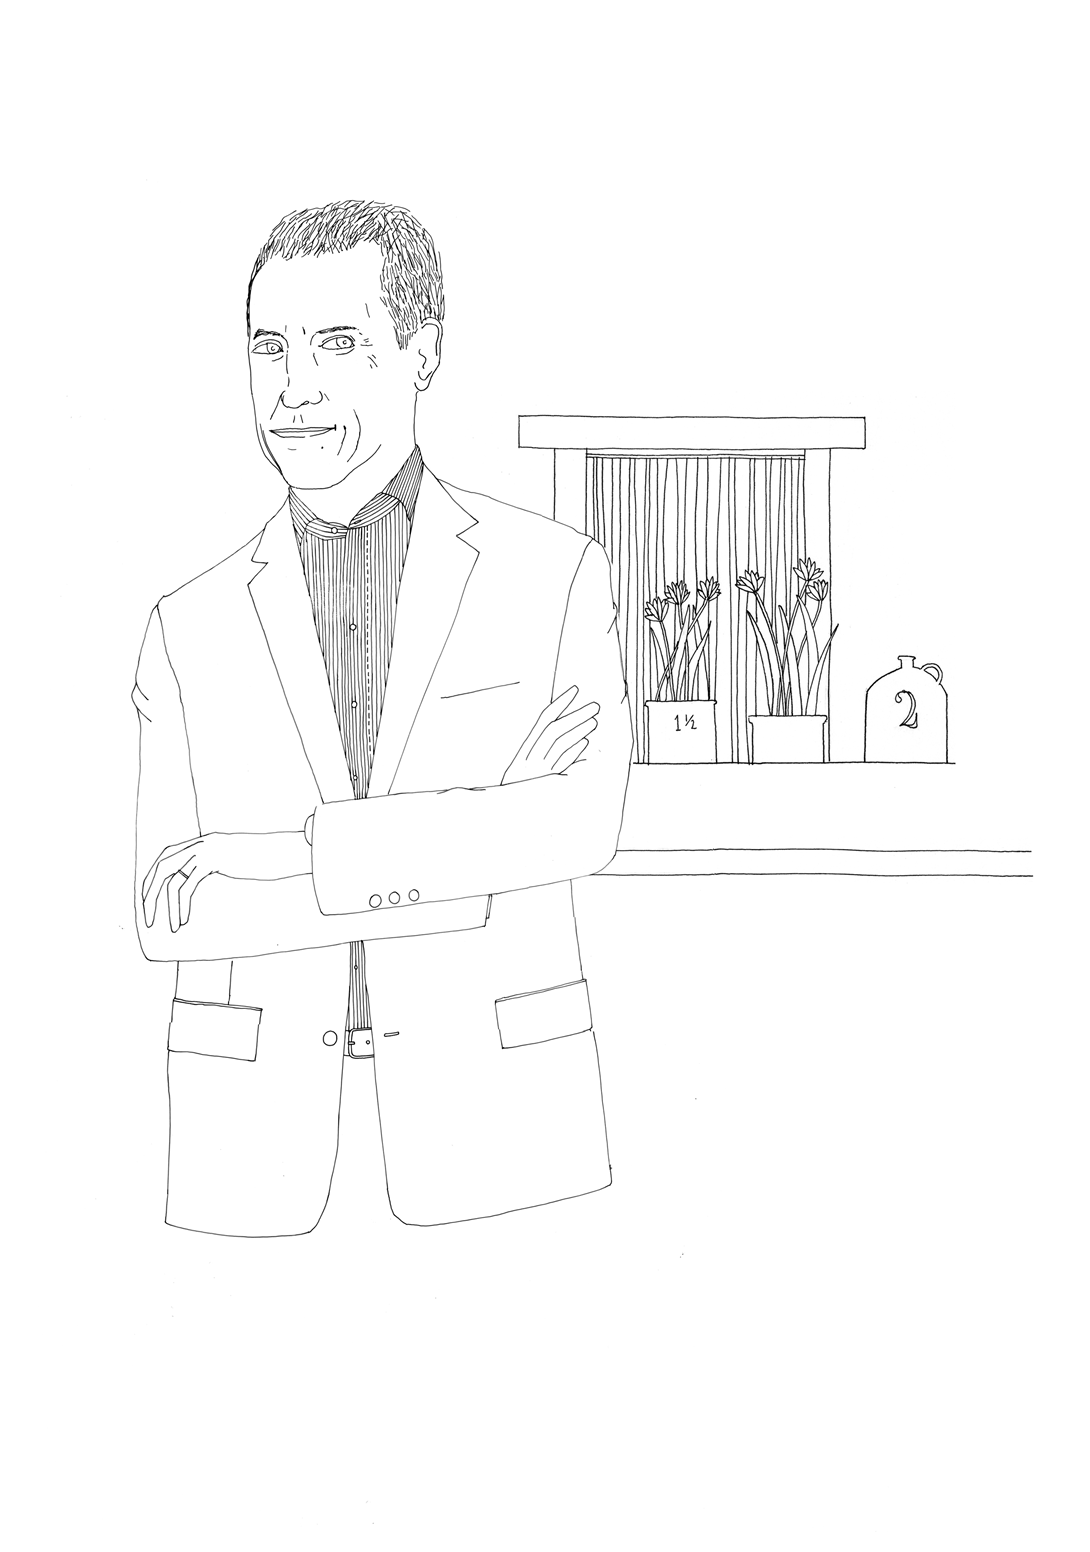 Danny Meyer, as drawn by Nigel Peake for The Art of the Restaurateur